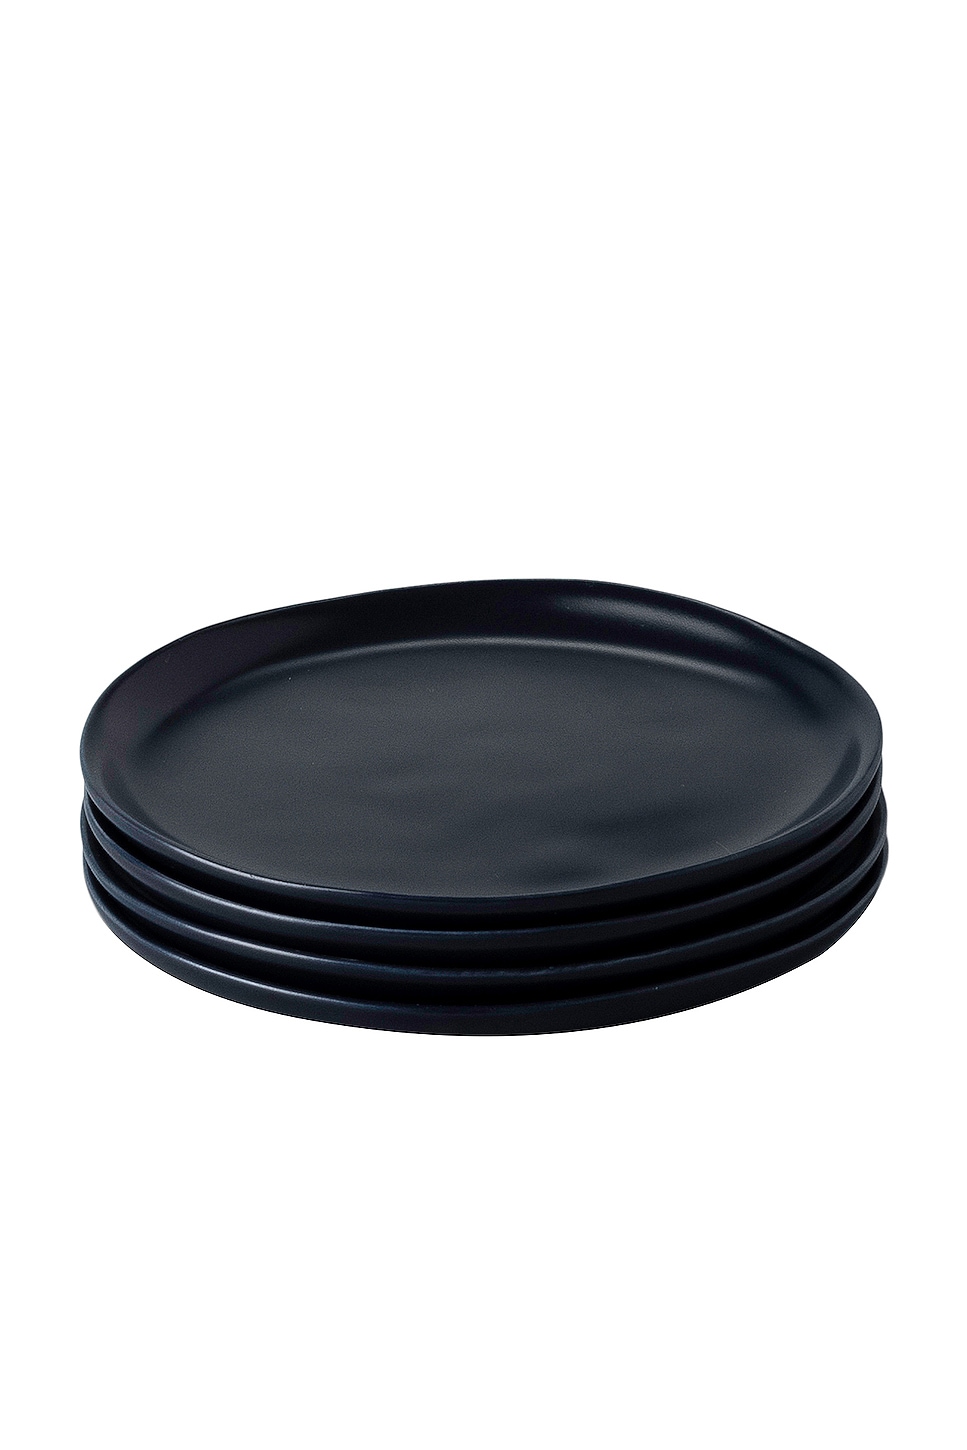 Fable The Dessert Plates Set of 4 in Midnight Blue